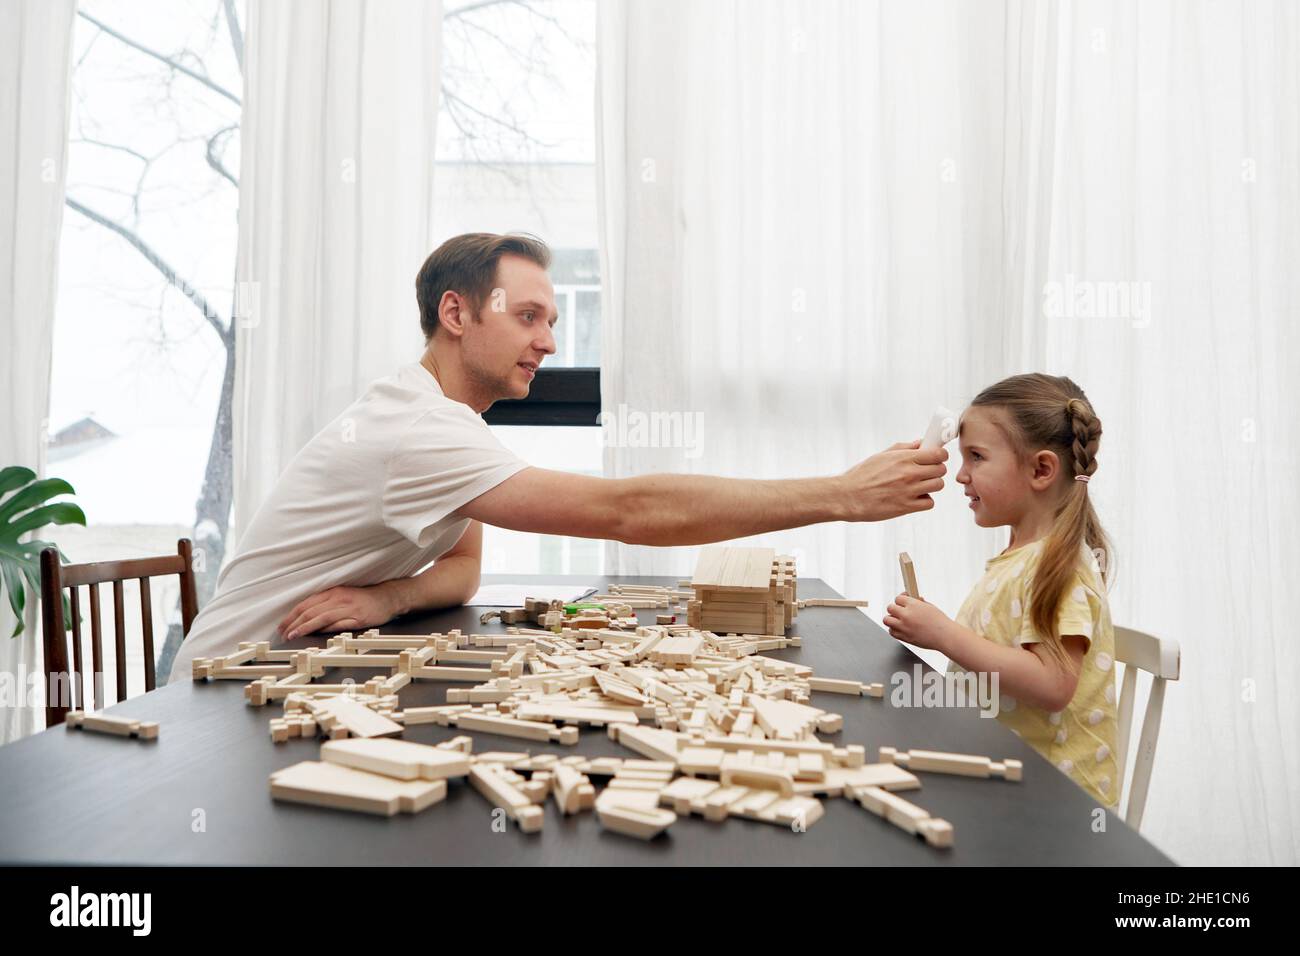 Side view of dad checking body temperature with infrared forehead thermometer of daughter sitting at table and playing with wooden blocks Stock Photo